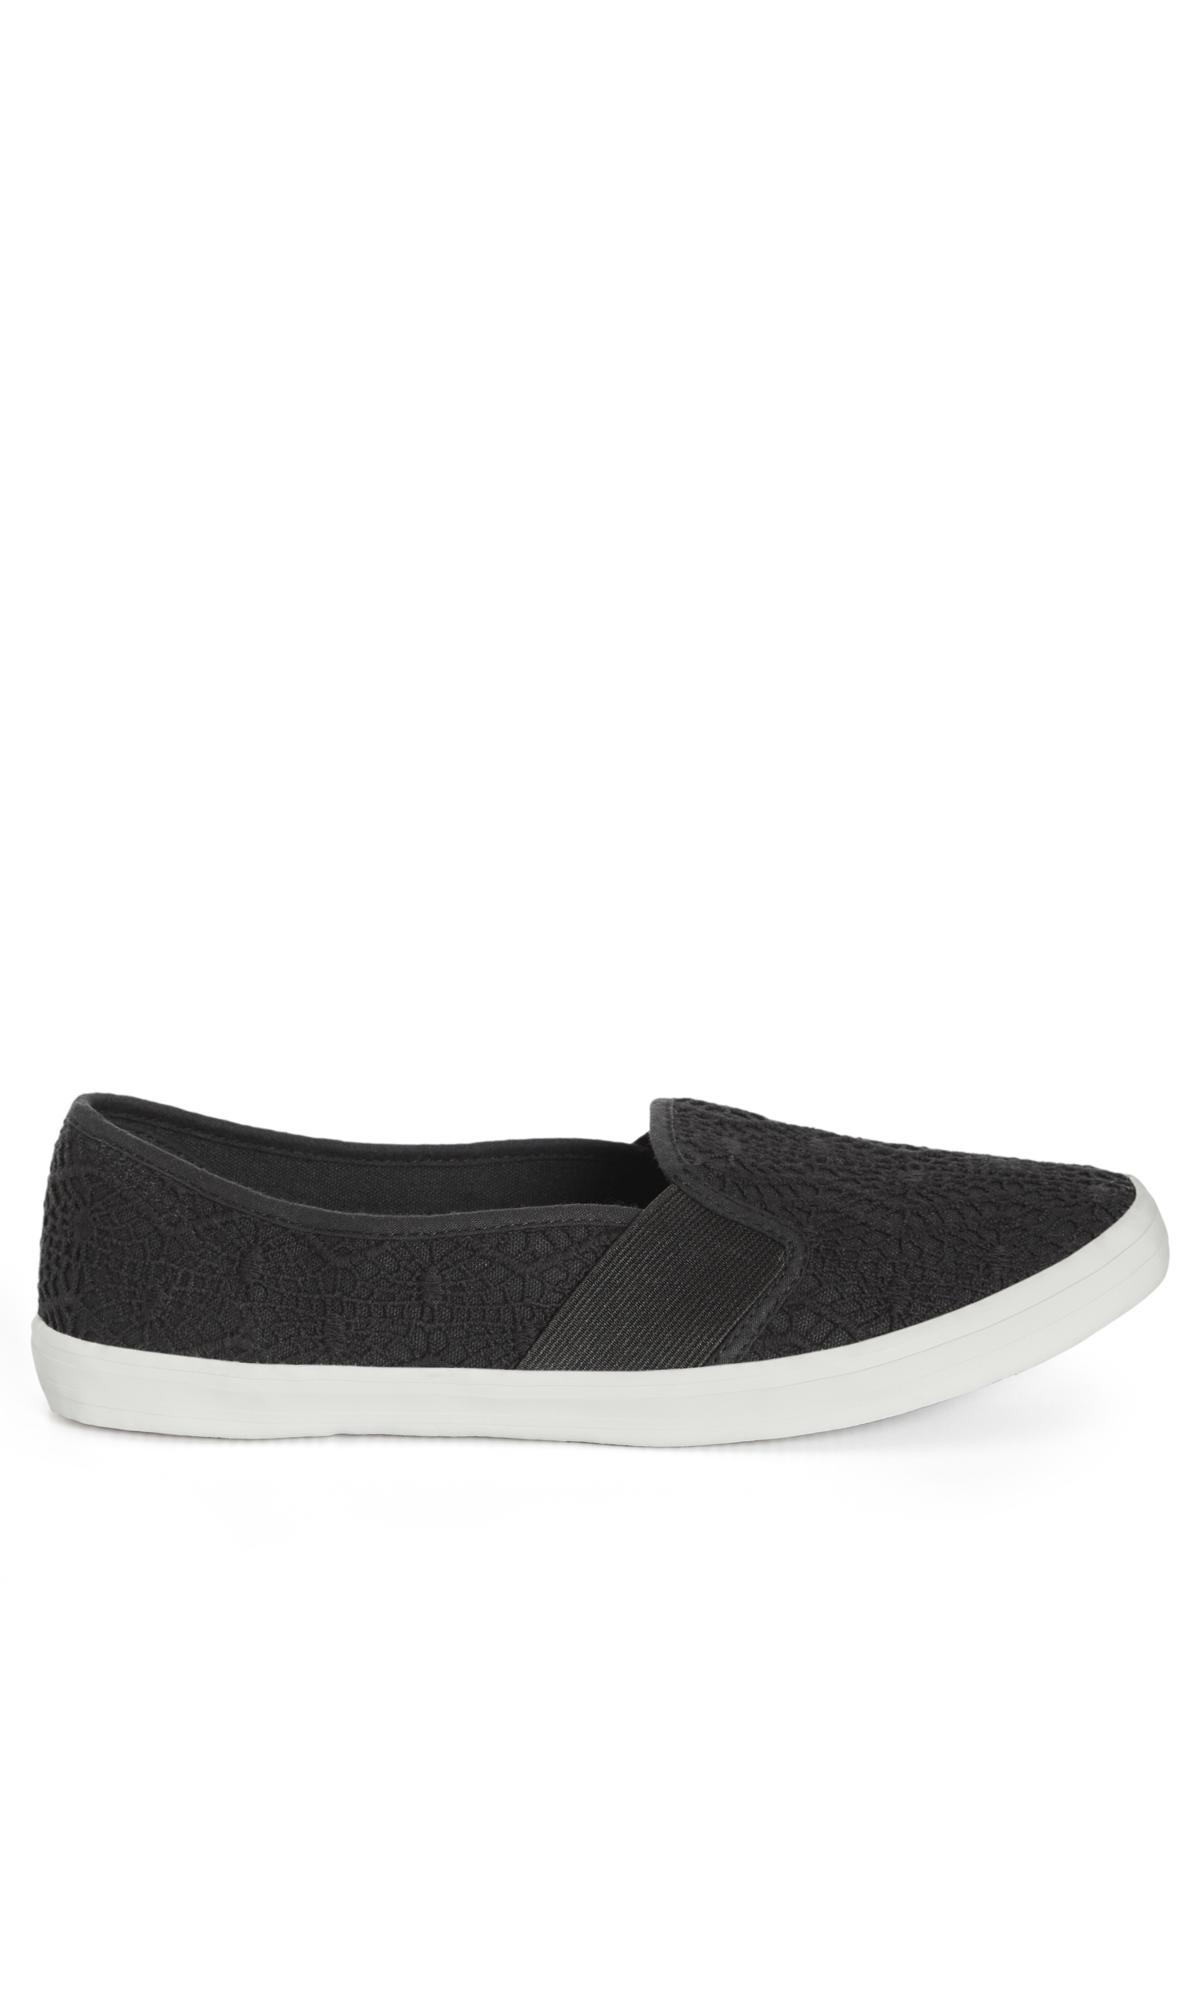 Evans Black Broderie Anglaise Slip On Trainers 2